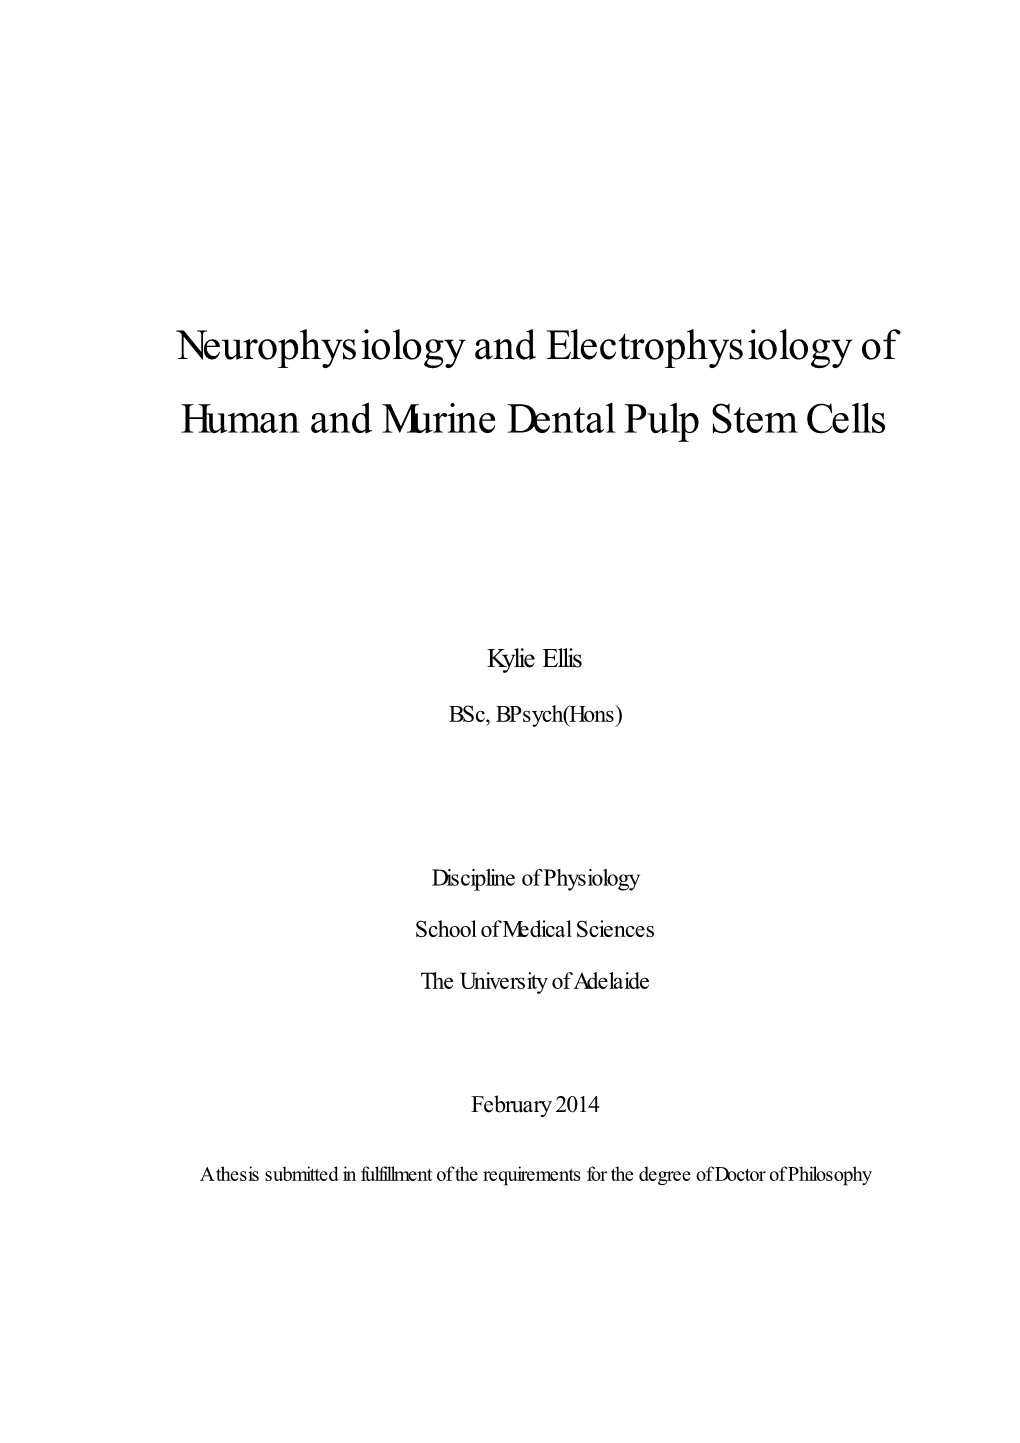 Neurophysiology and Electrophysiology of Human and Murine Dental Pulp Stem Cells